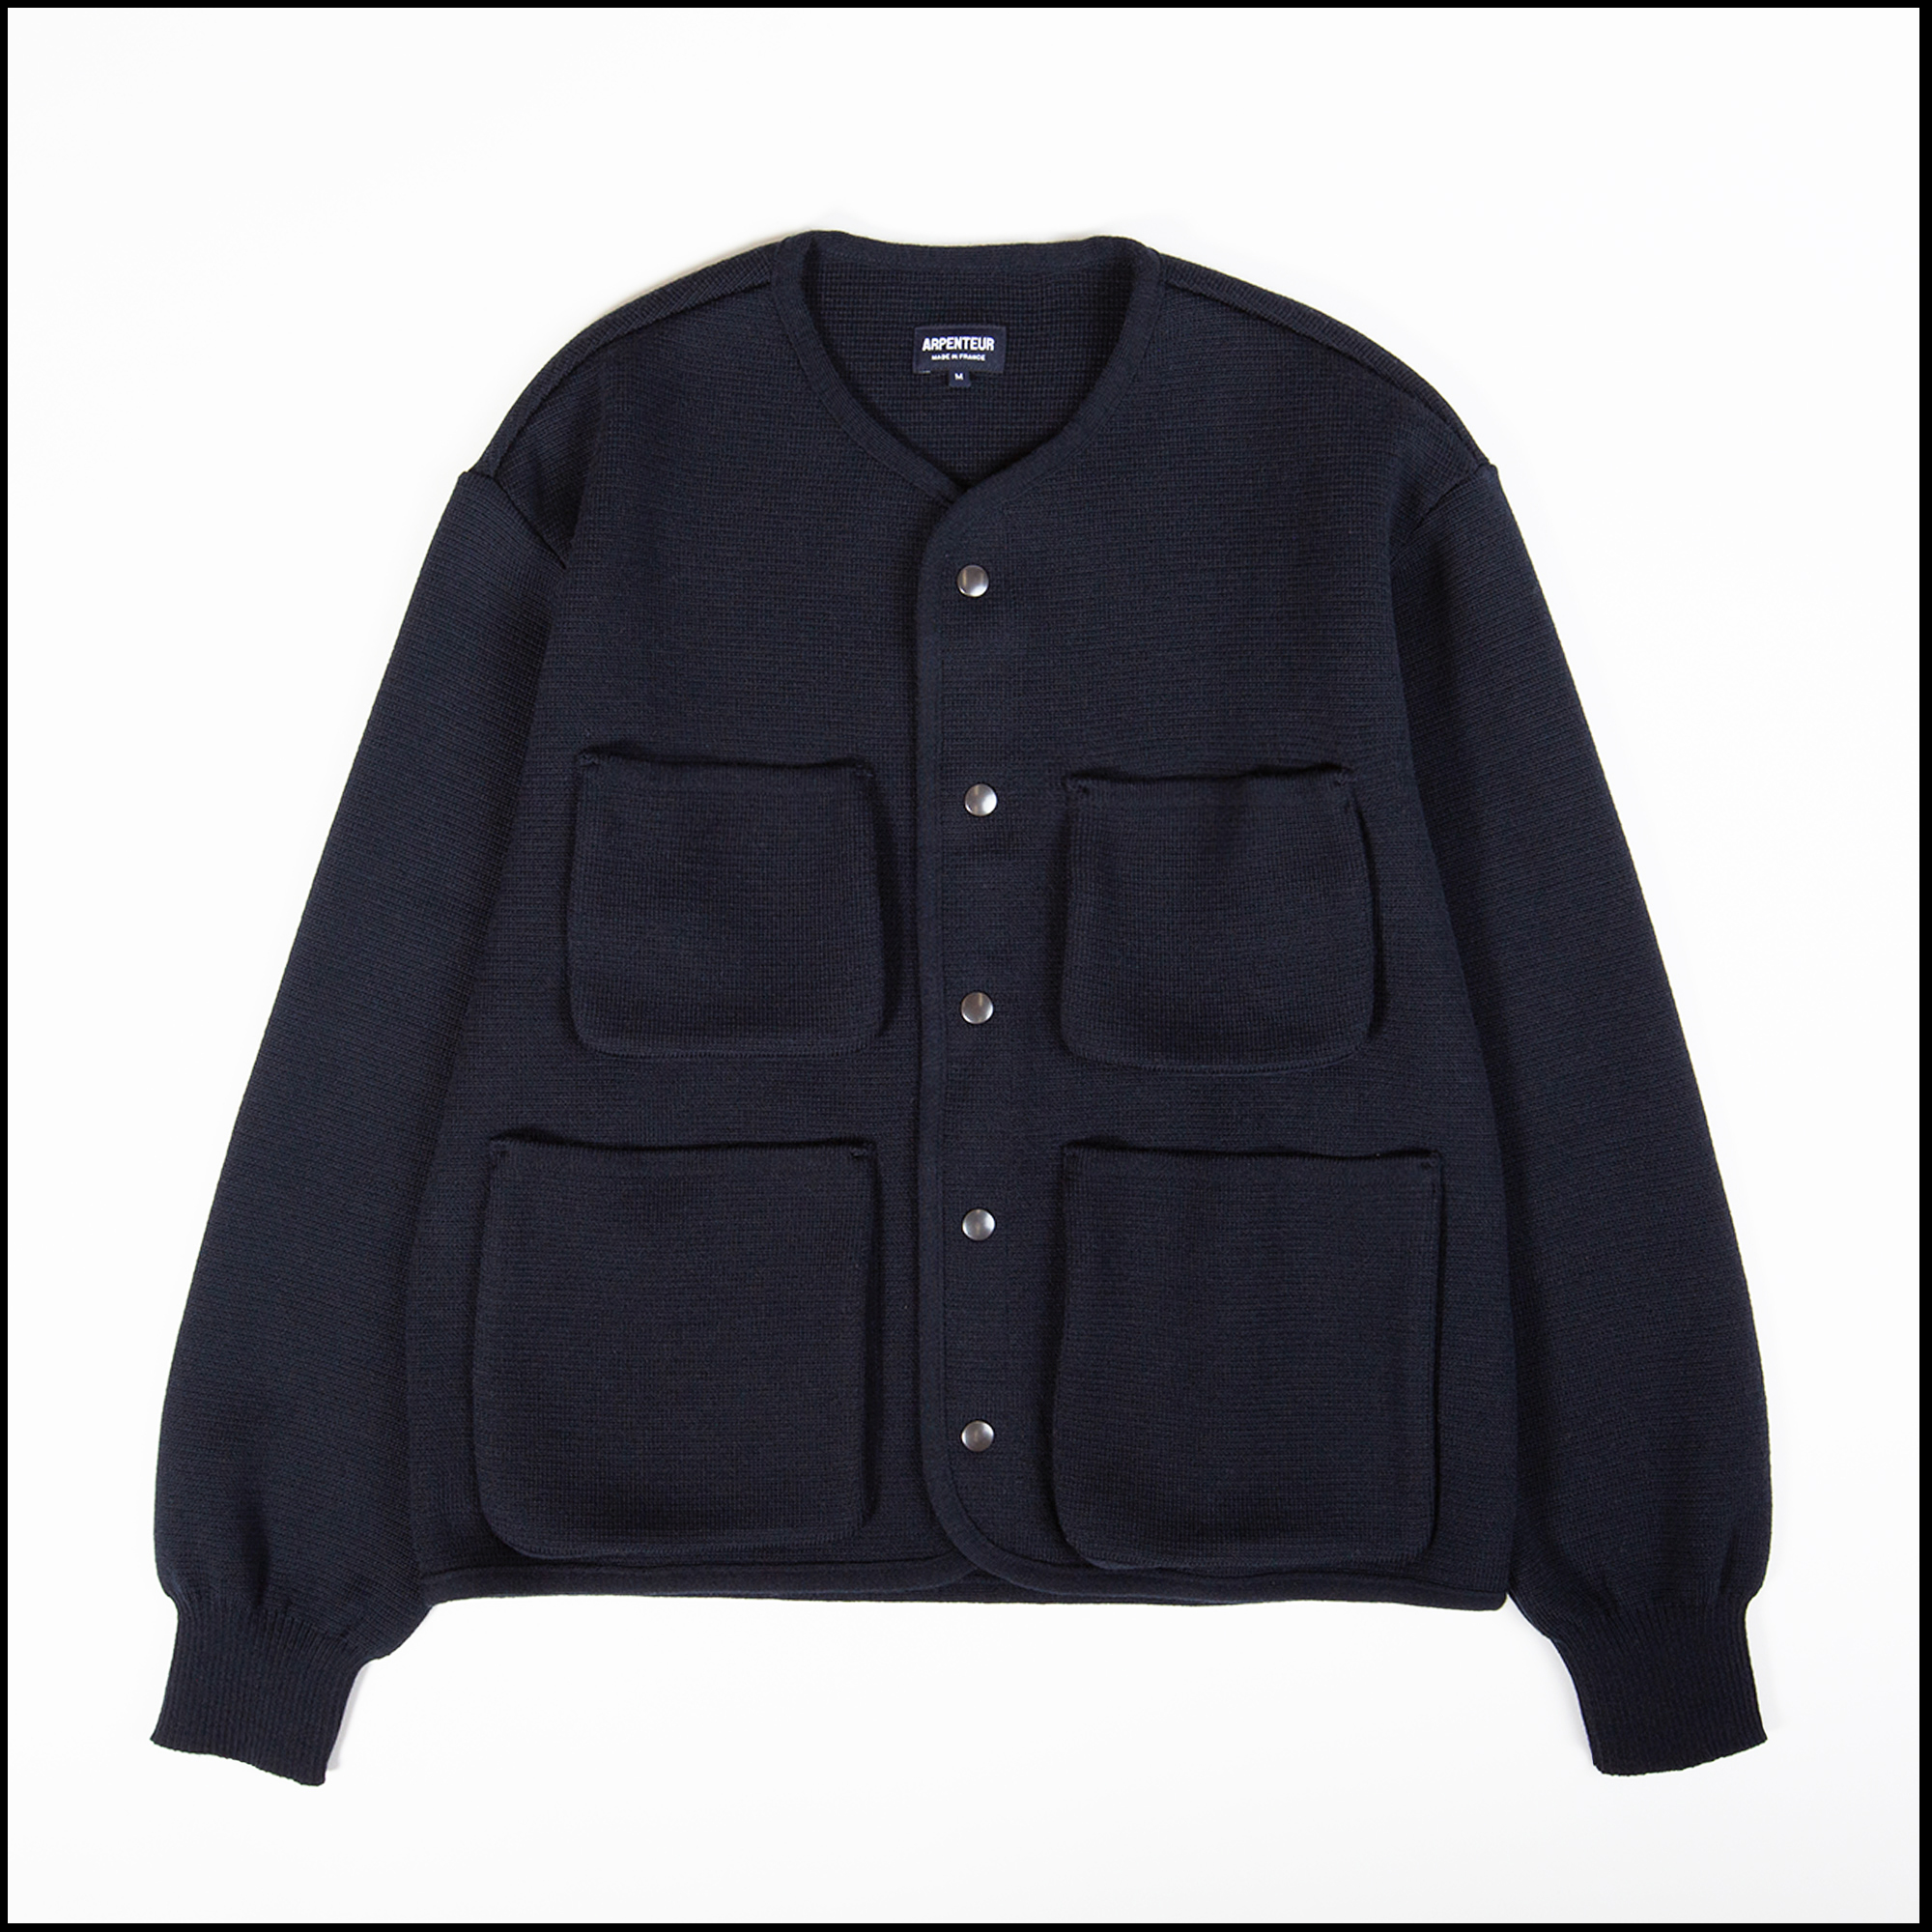 George cardigan in Midnight color by Arpenteur